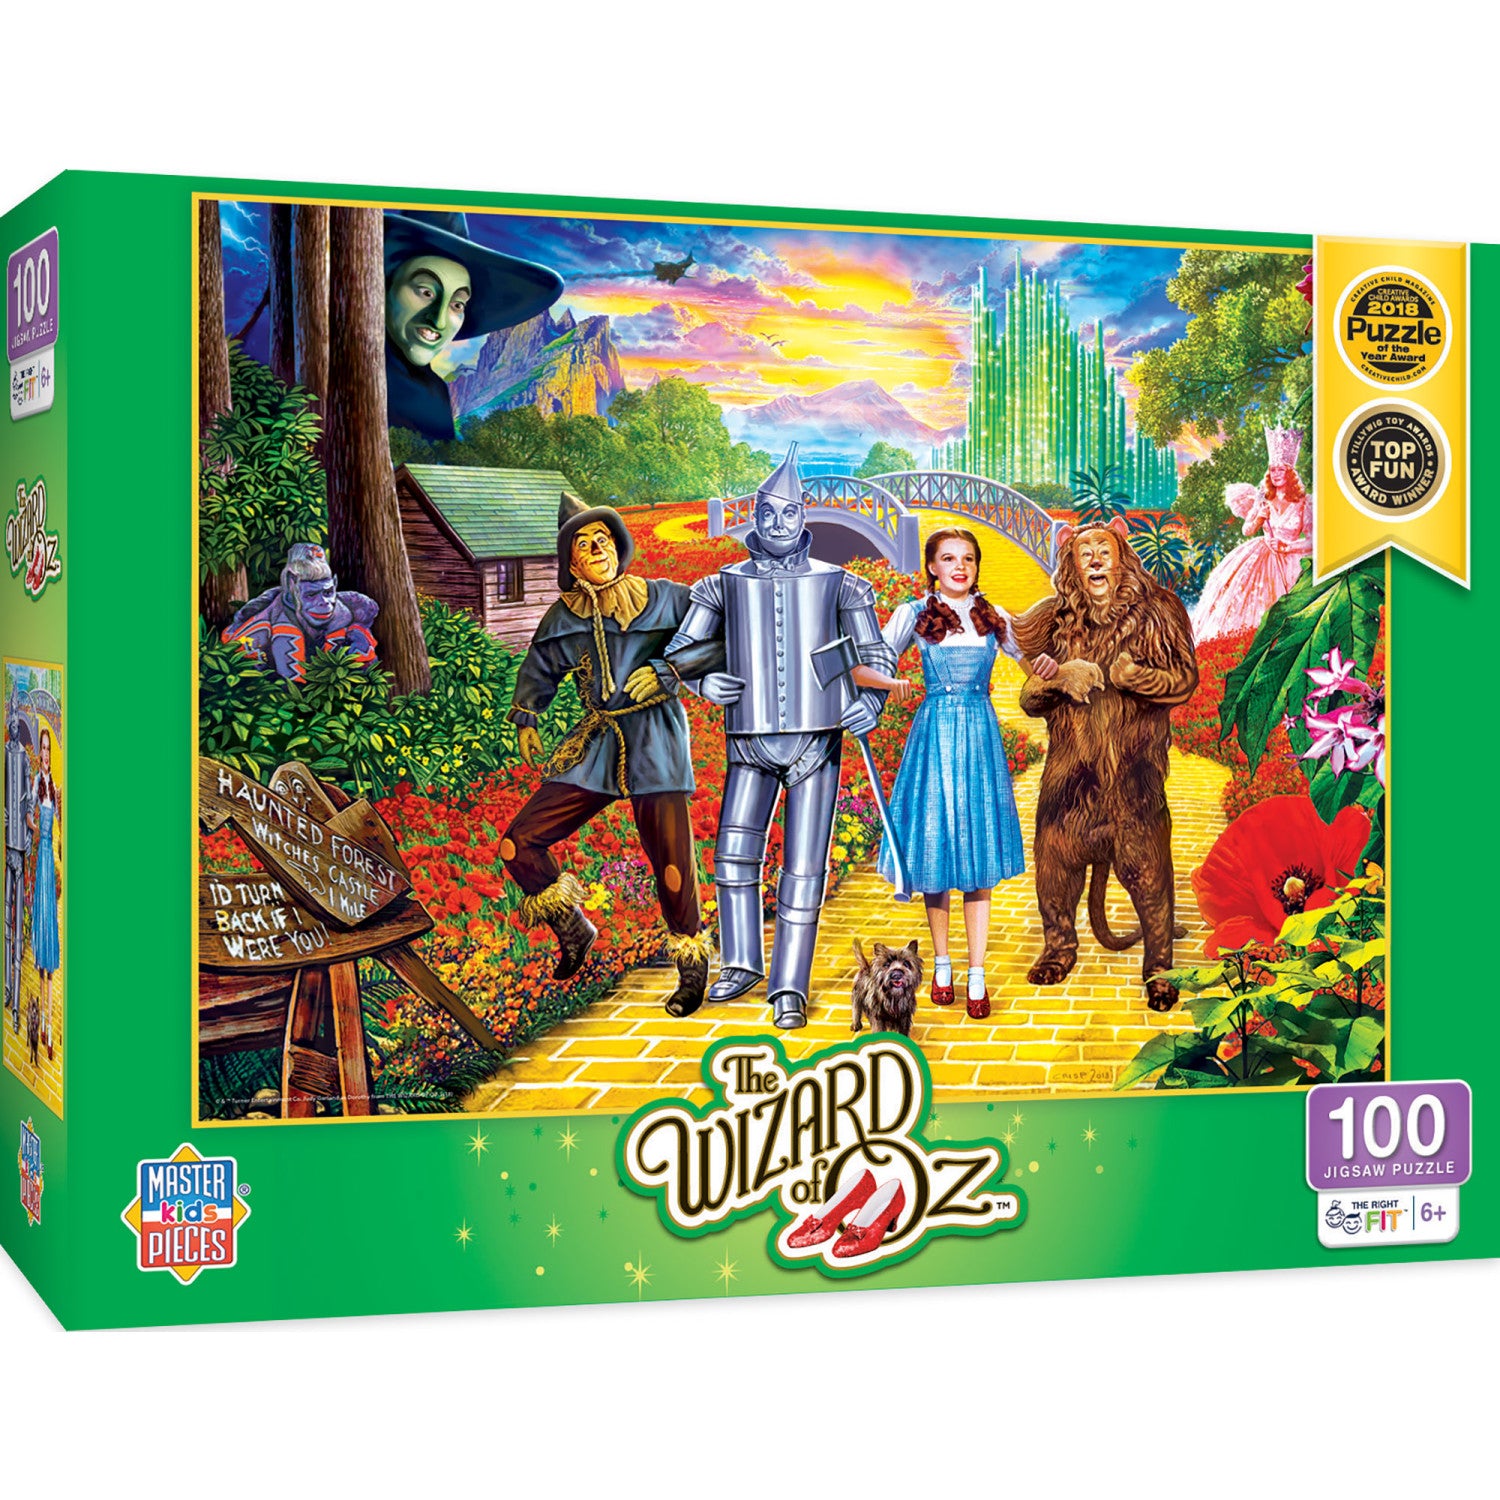 The Wizard of Oz - 100 Piece Puzzle